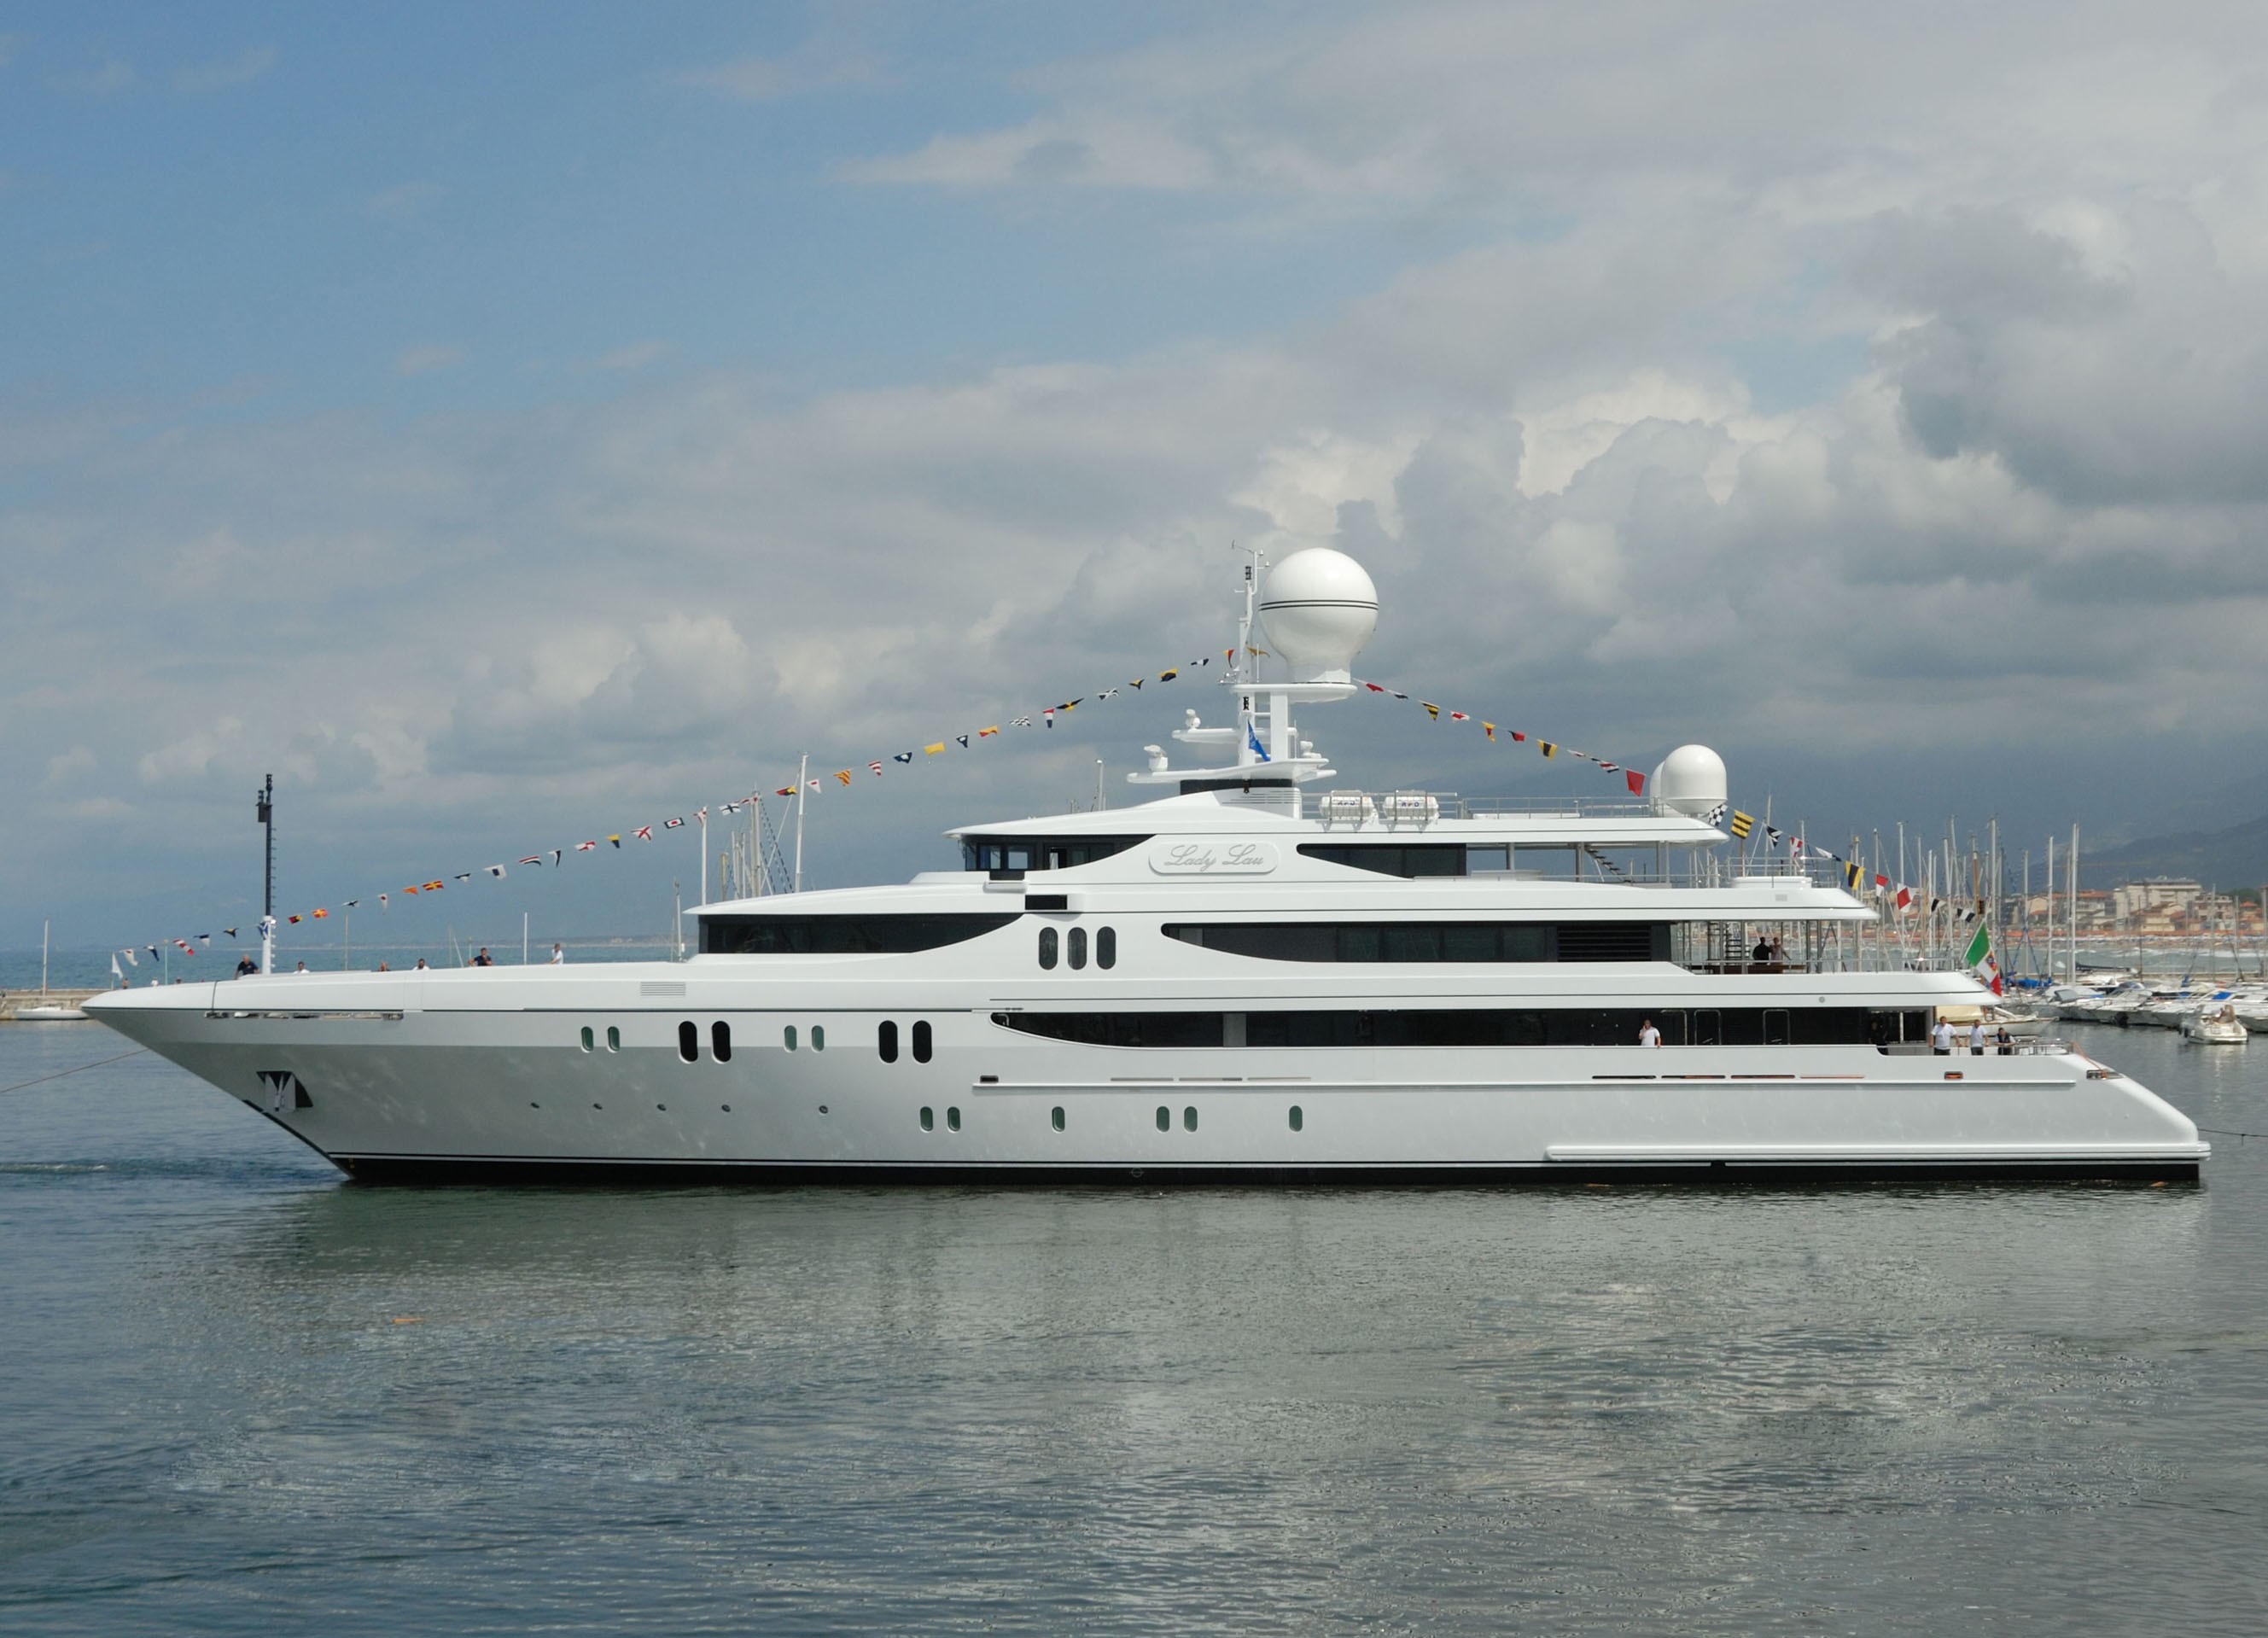 The 65m Yacht DOUBLE DOWN